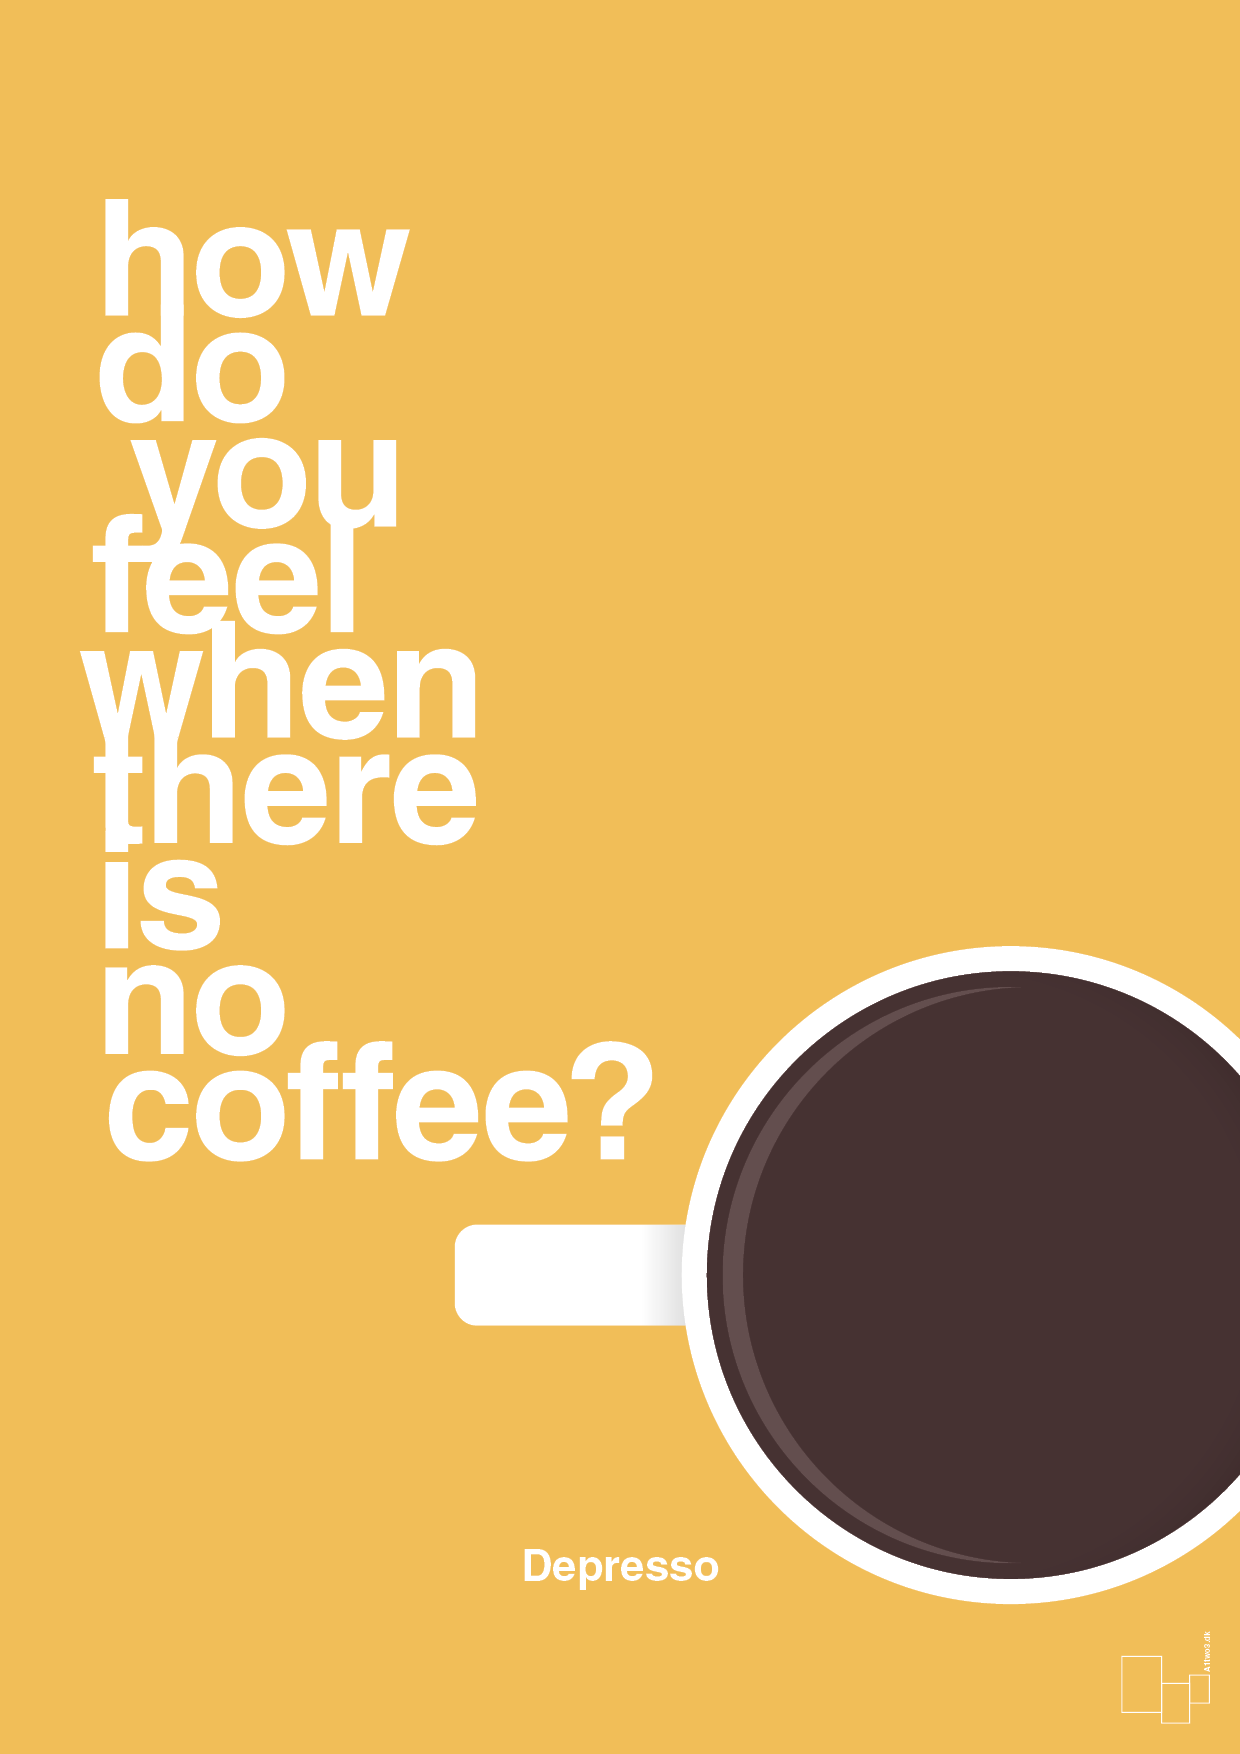 how do you feel when there is no coffee? depresso - Plakat med Mad & Drikke i Honeycomb